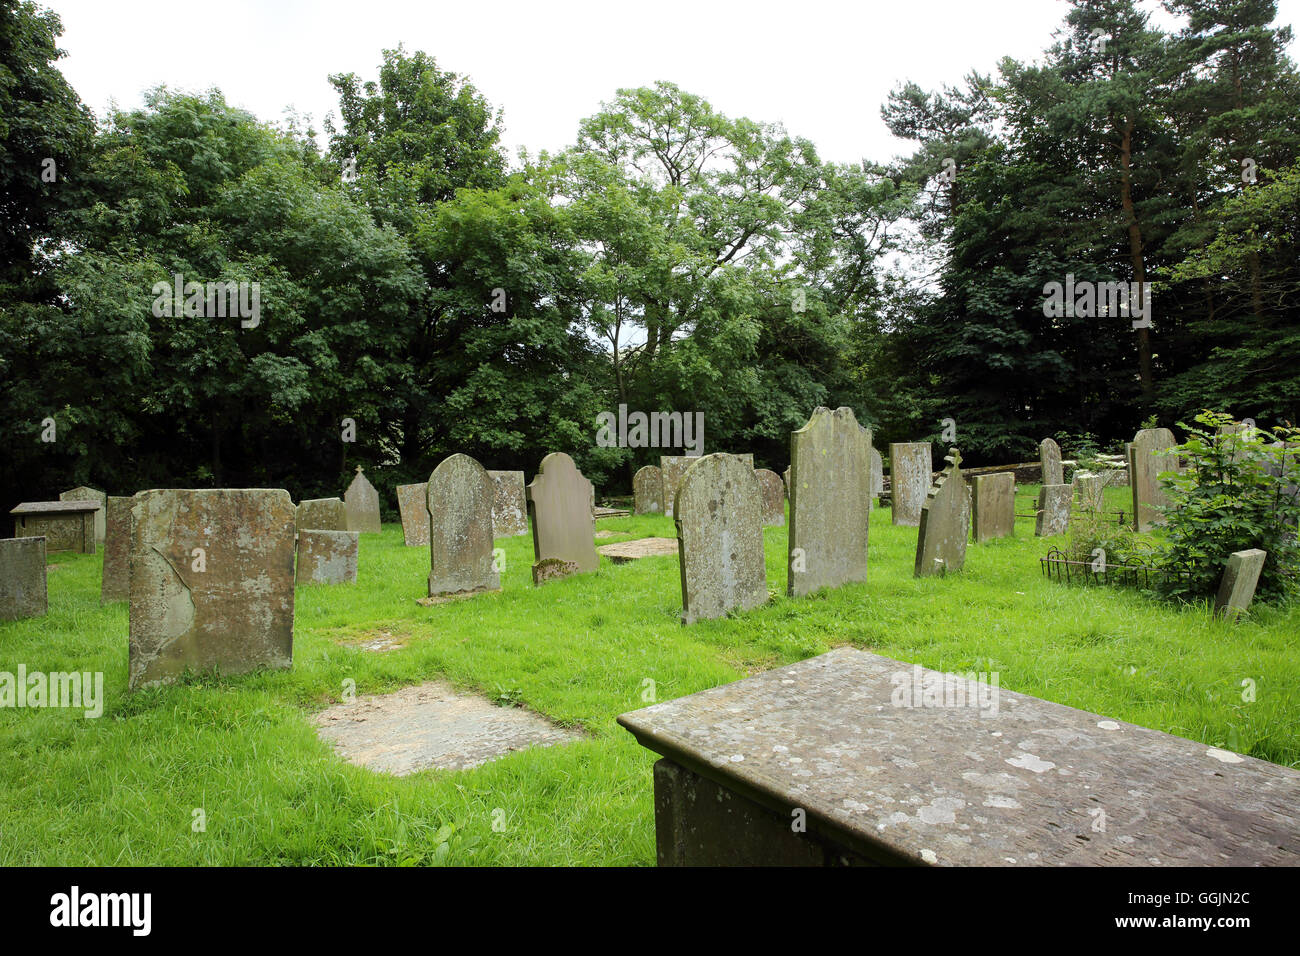 The English graveyard in the Peak District village of Edale, Derbyshire, England, UK Stock Photo